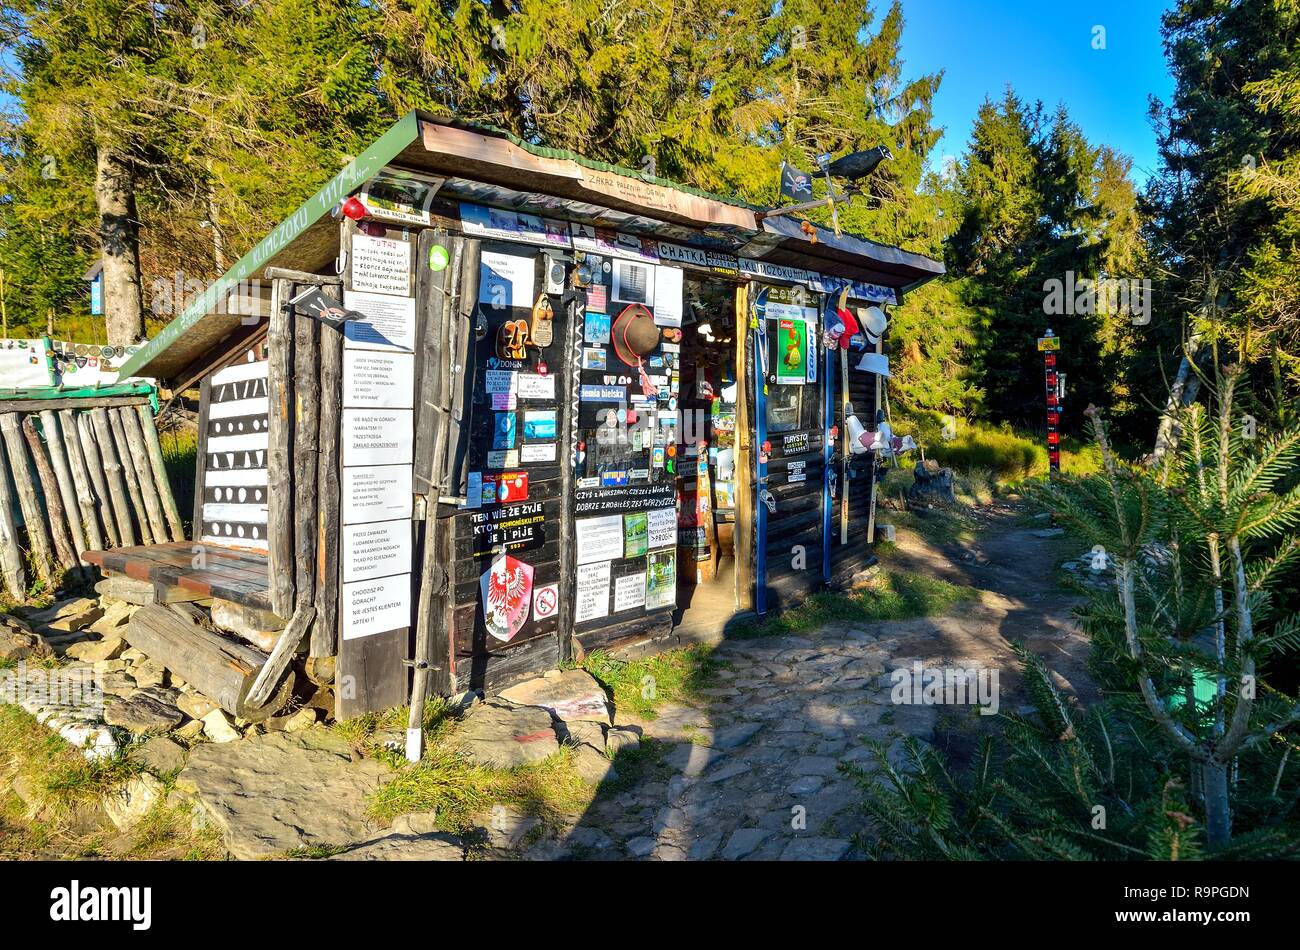 BESKIDS, POLAND - NOVEMBER 12, 2018: Beautiful colorful wooden cottage in the mountains in the Beskids Mountains, Poland. Stock Photo